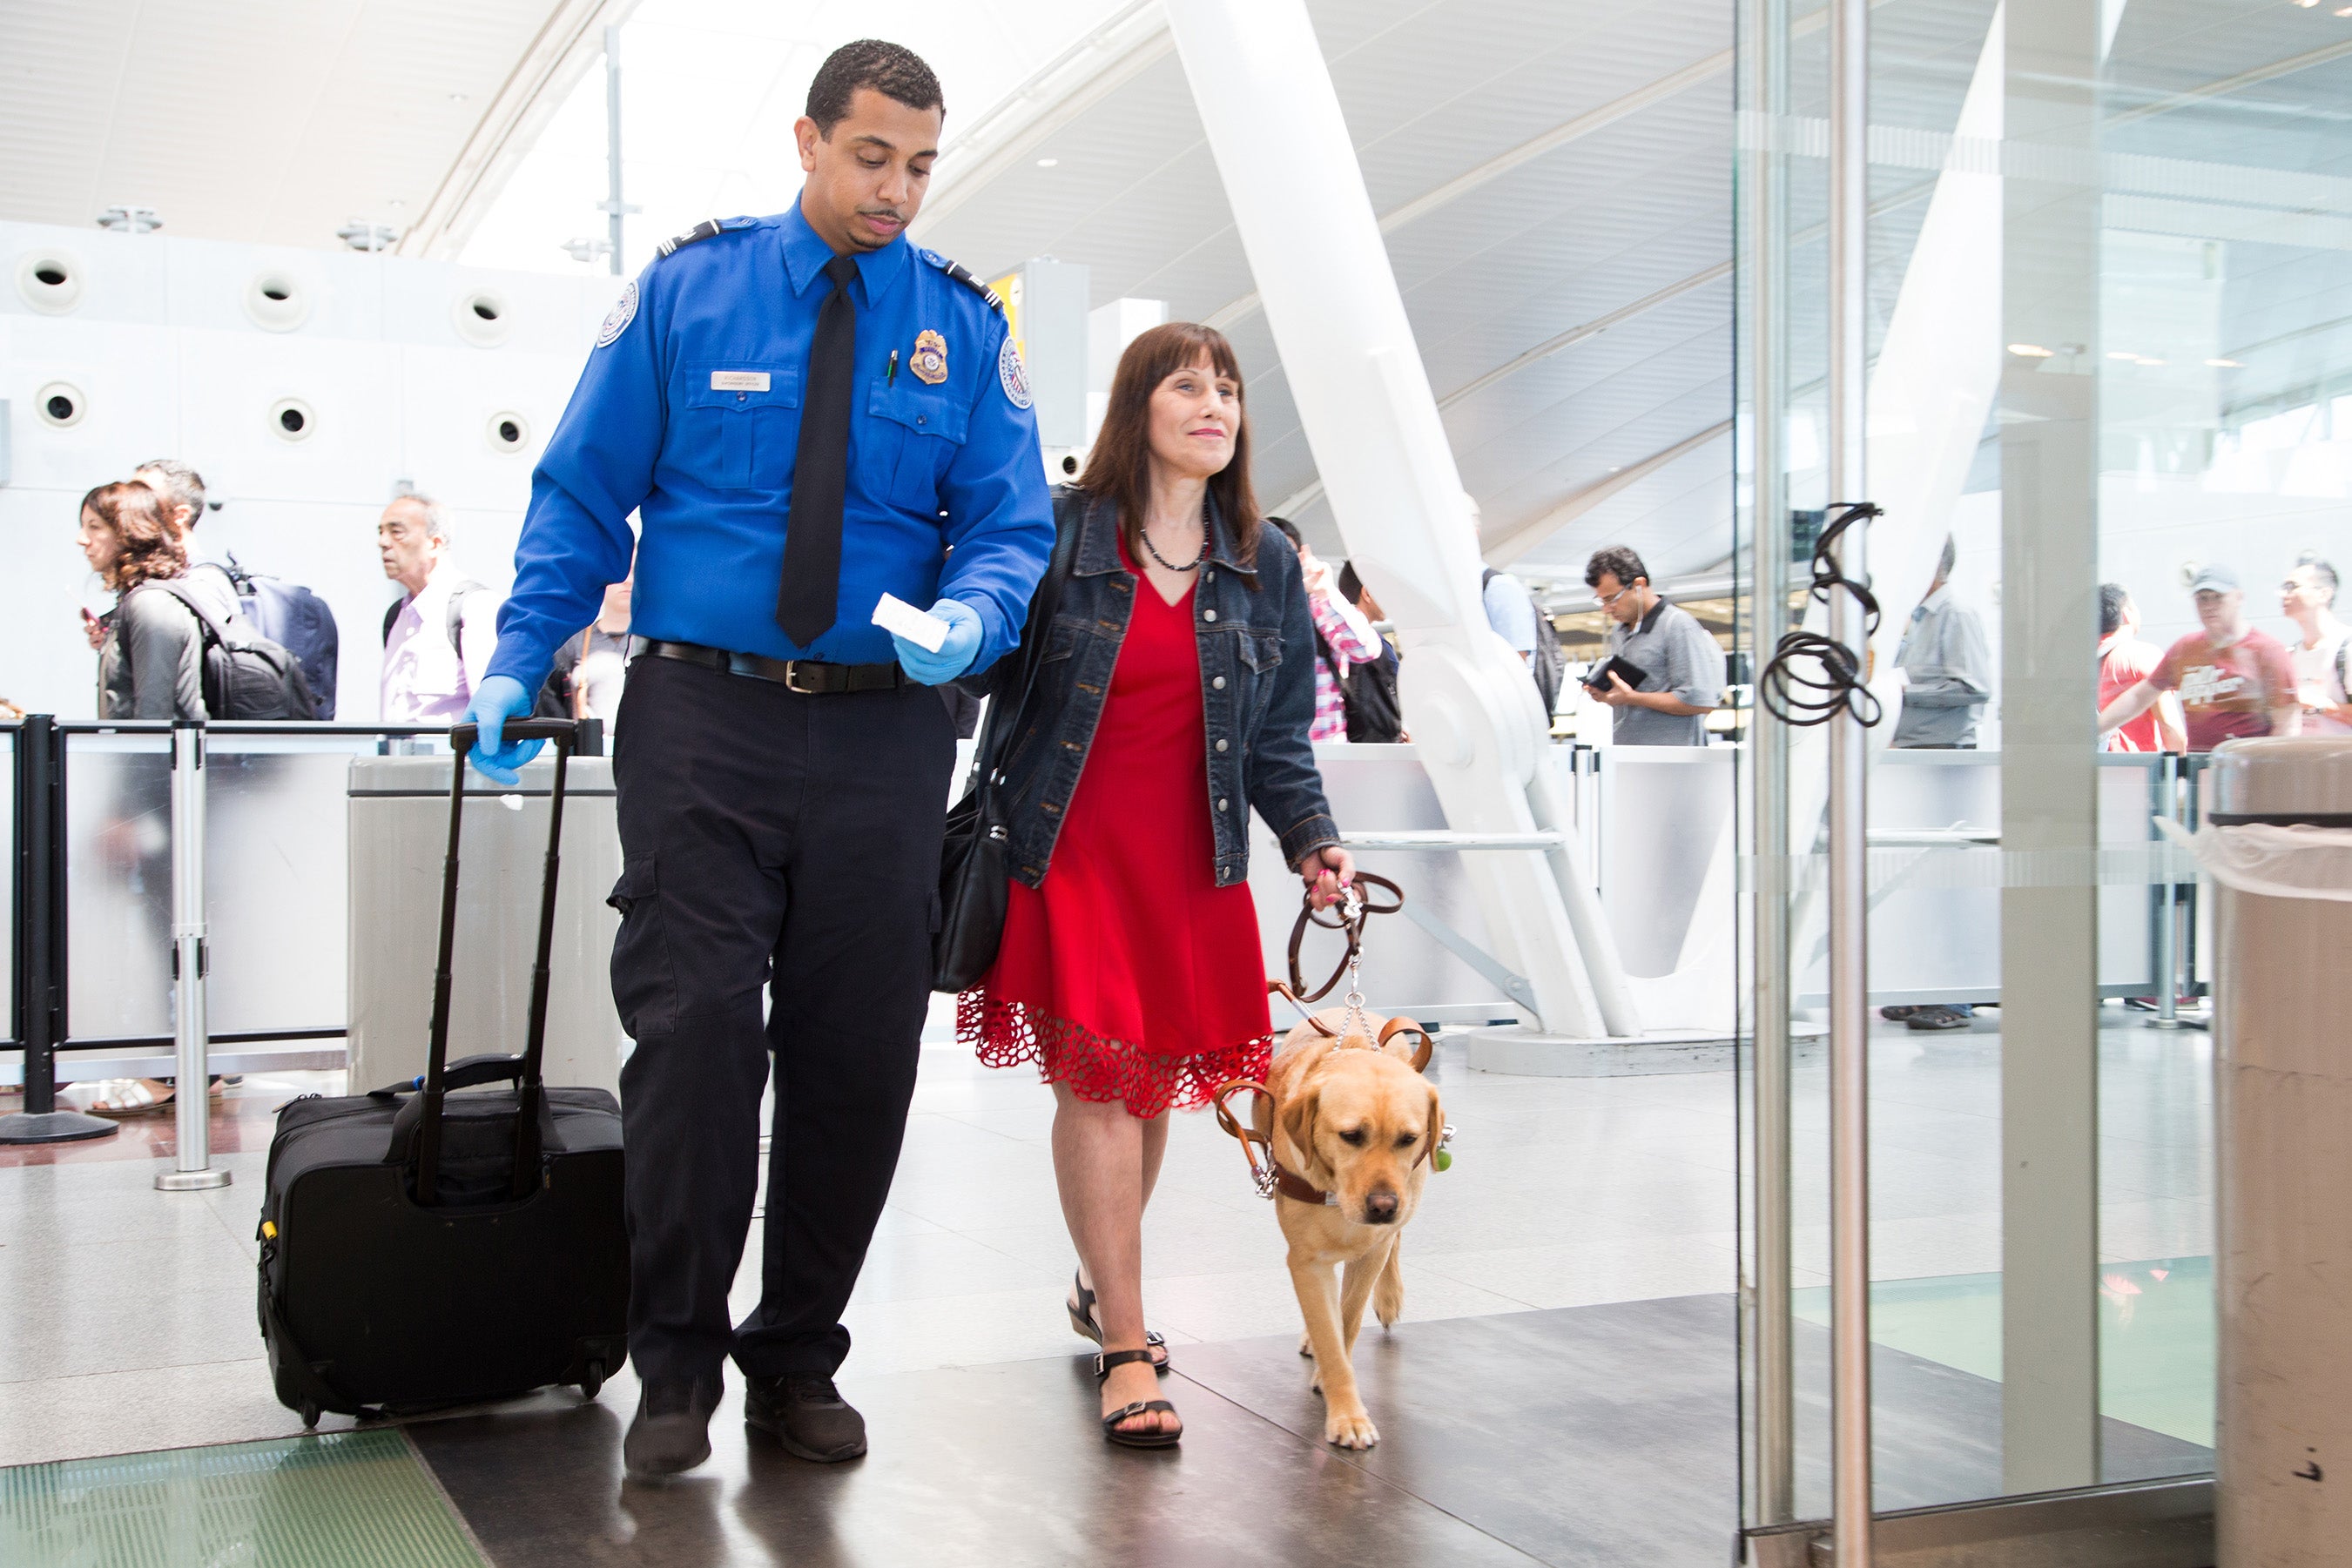 TSA agent and woman with guide dog at airport